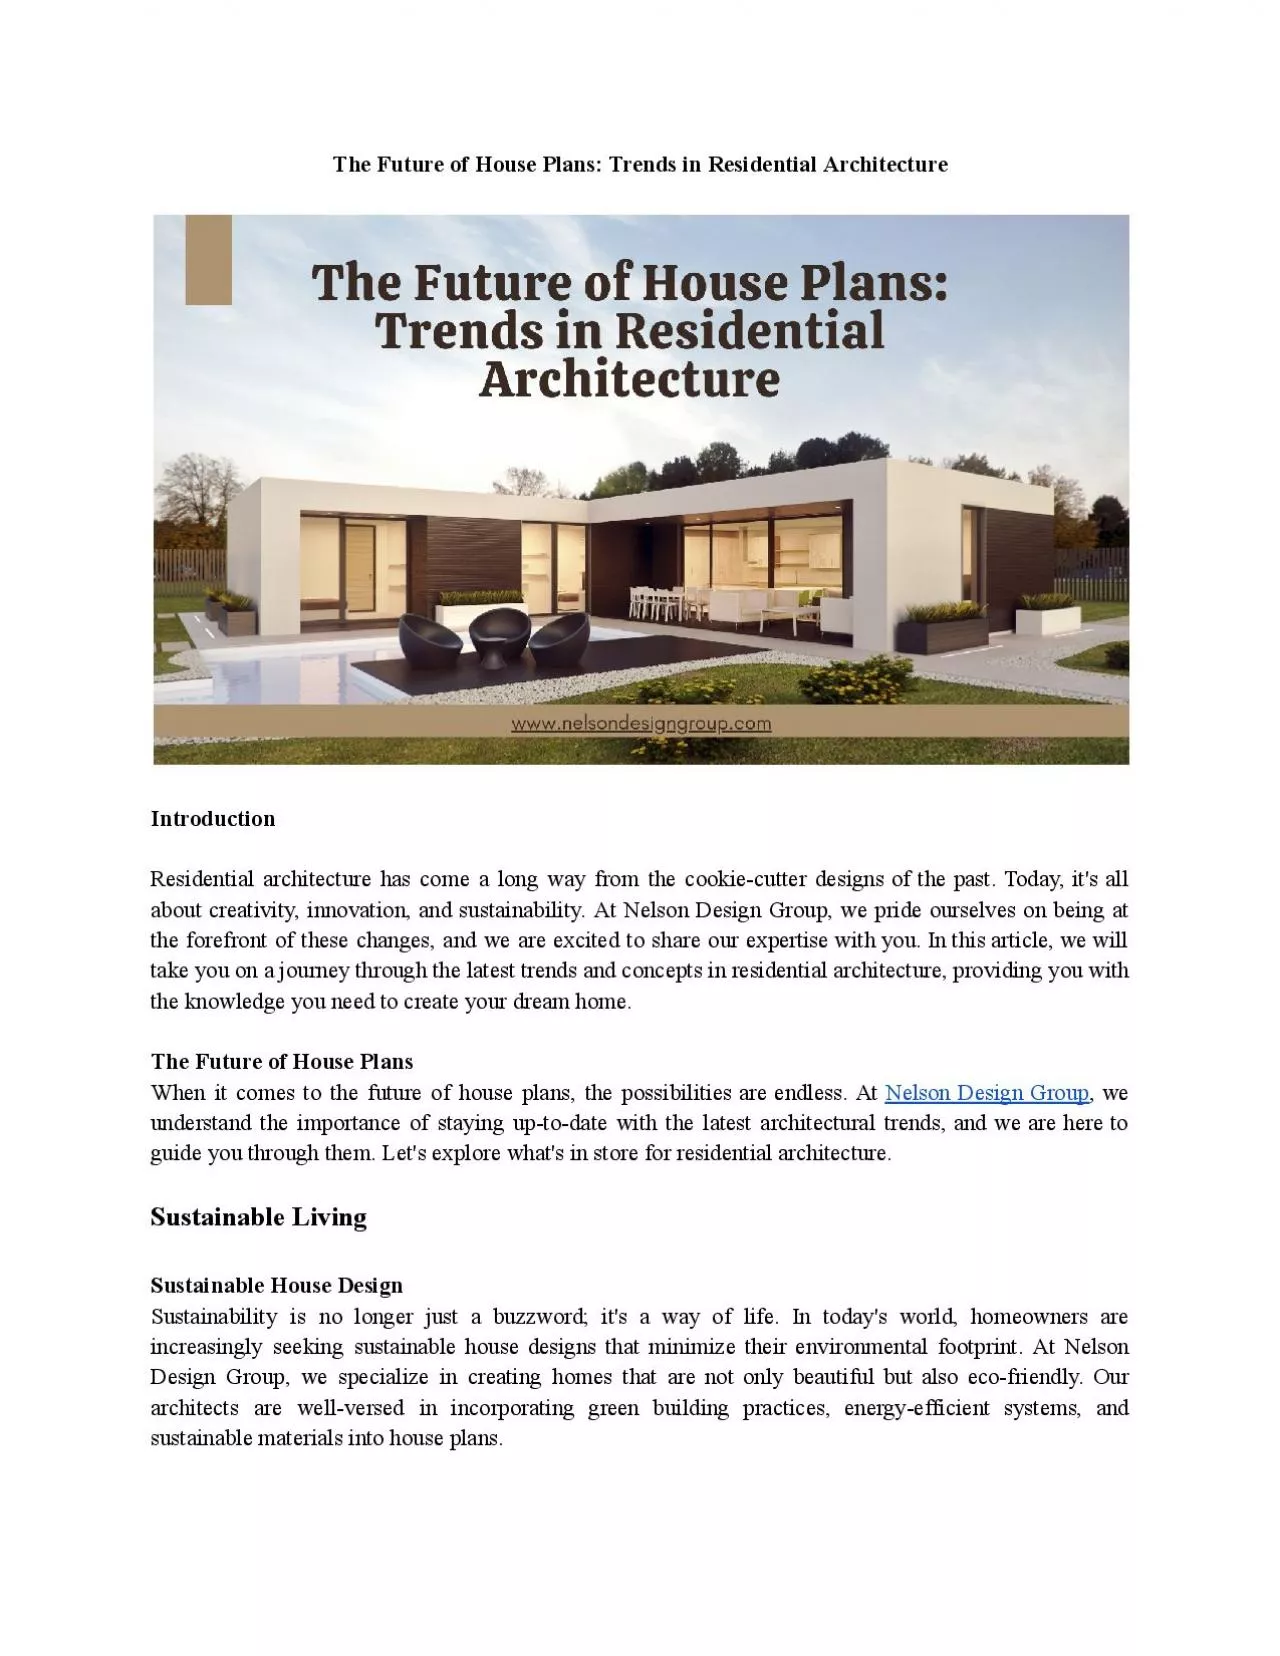 The Future of House Plans: Trends in Residential Architecture